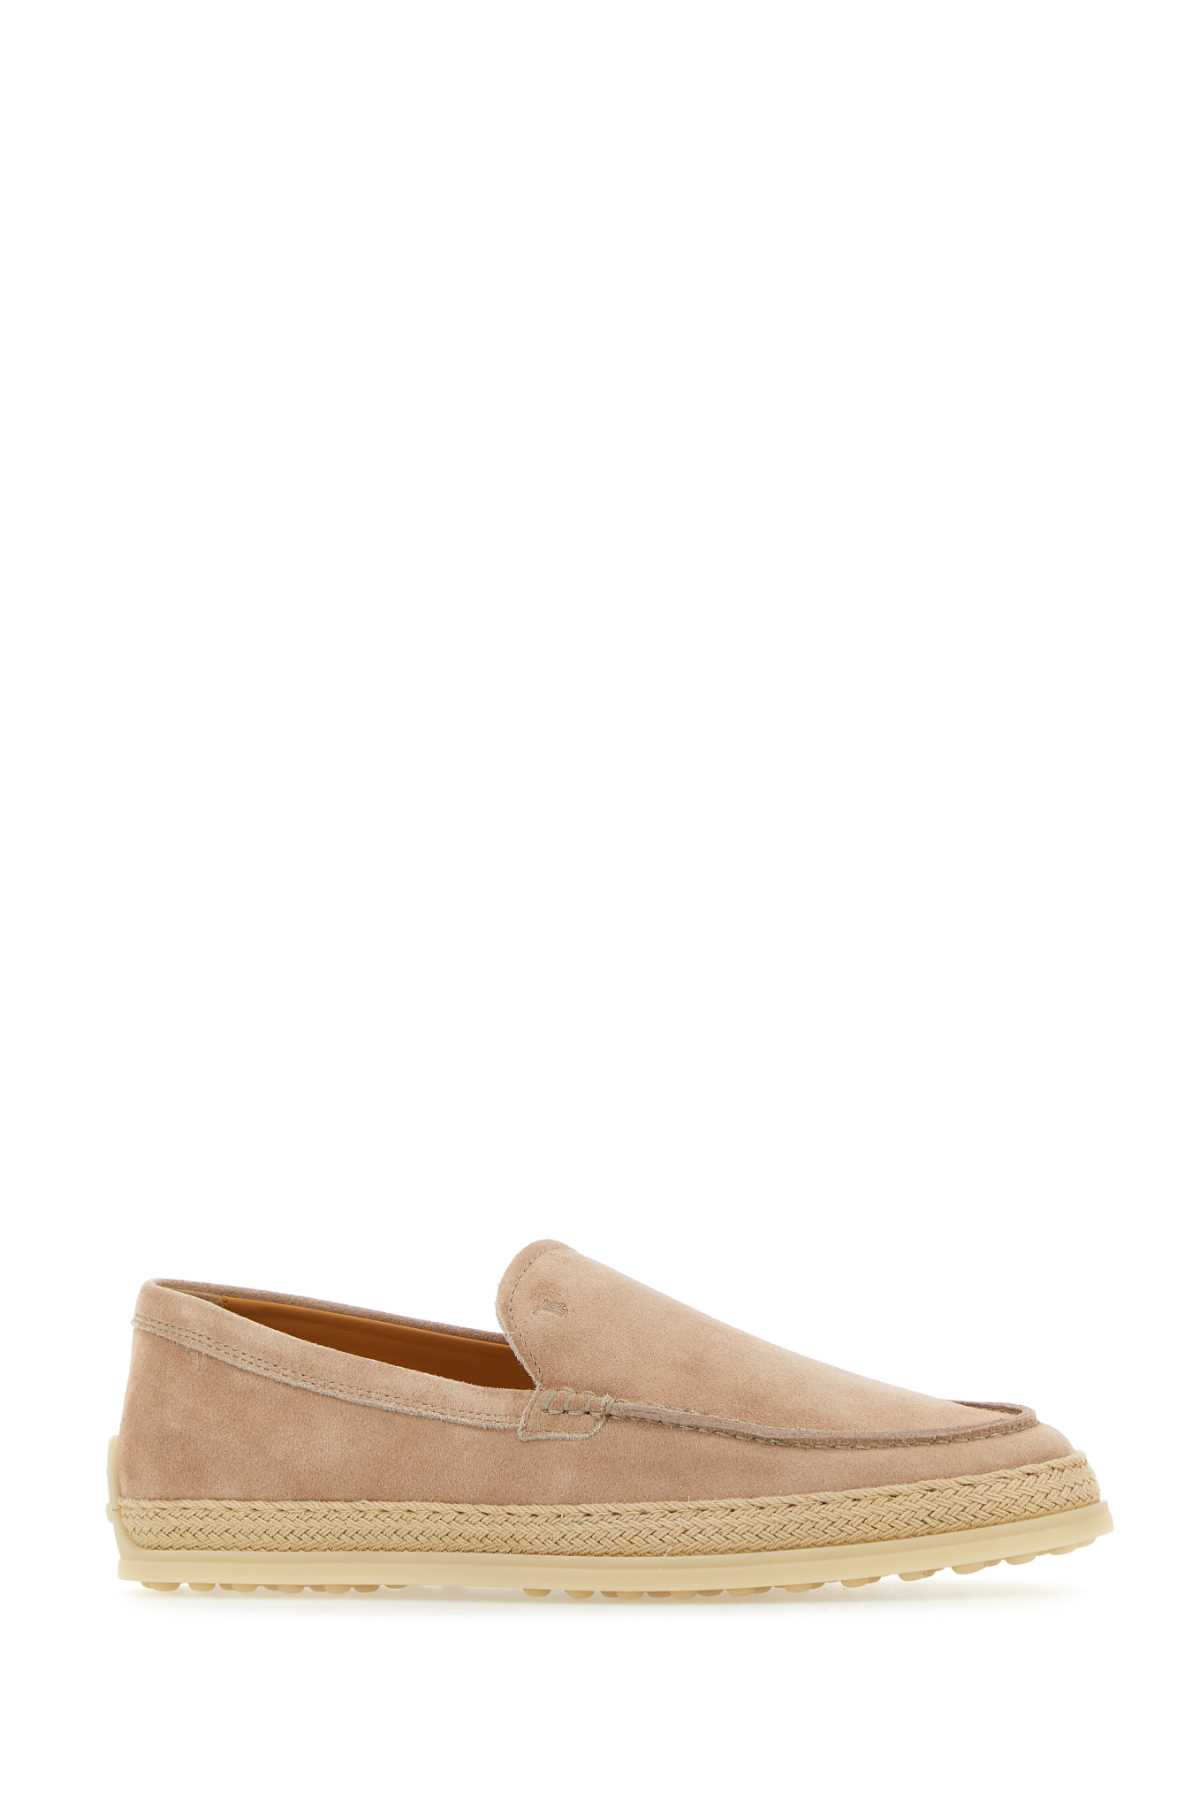 TOD'S ANTIQUED PINK SUEDE LOAFERS